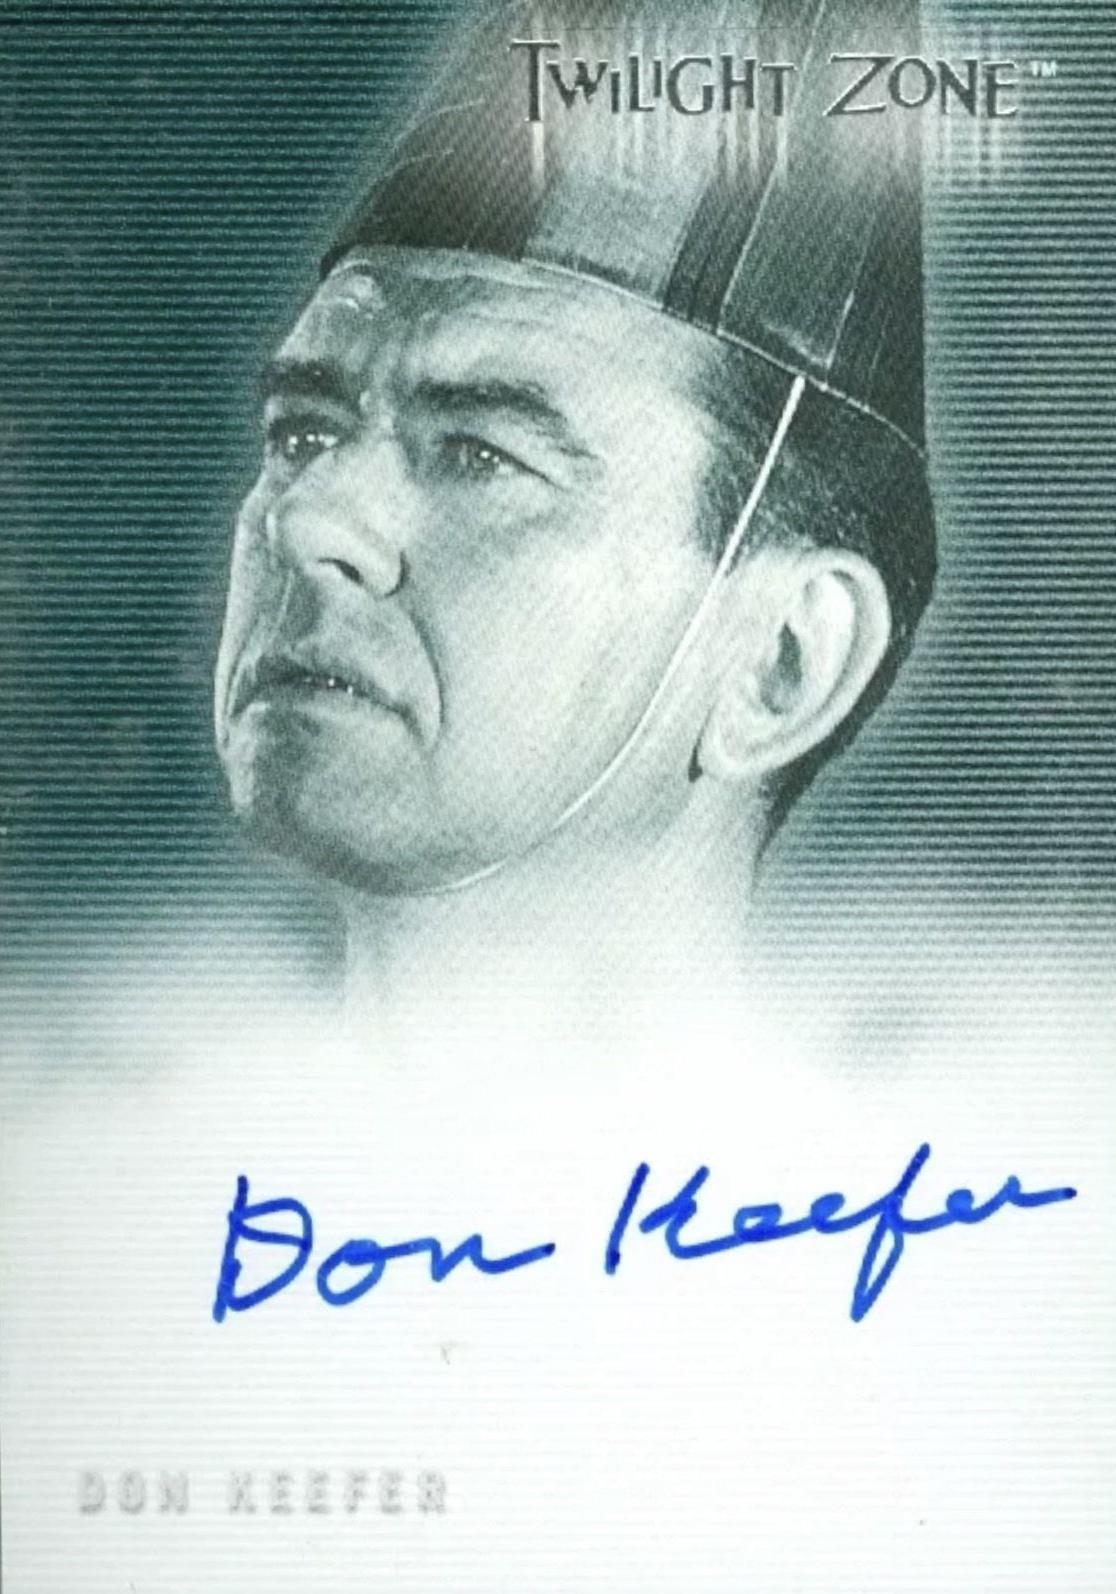  Don Keefer player image